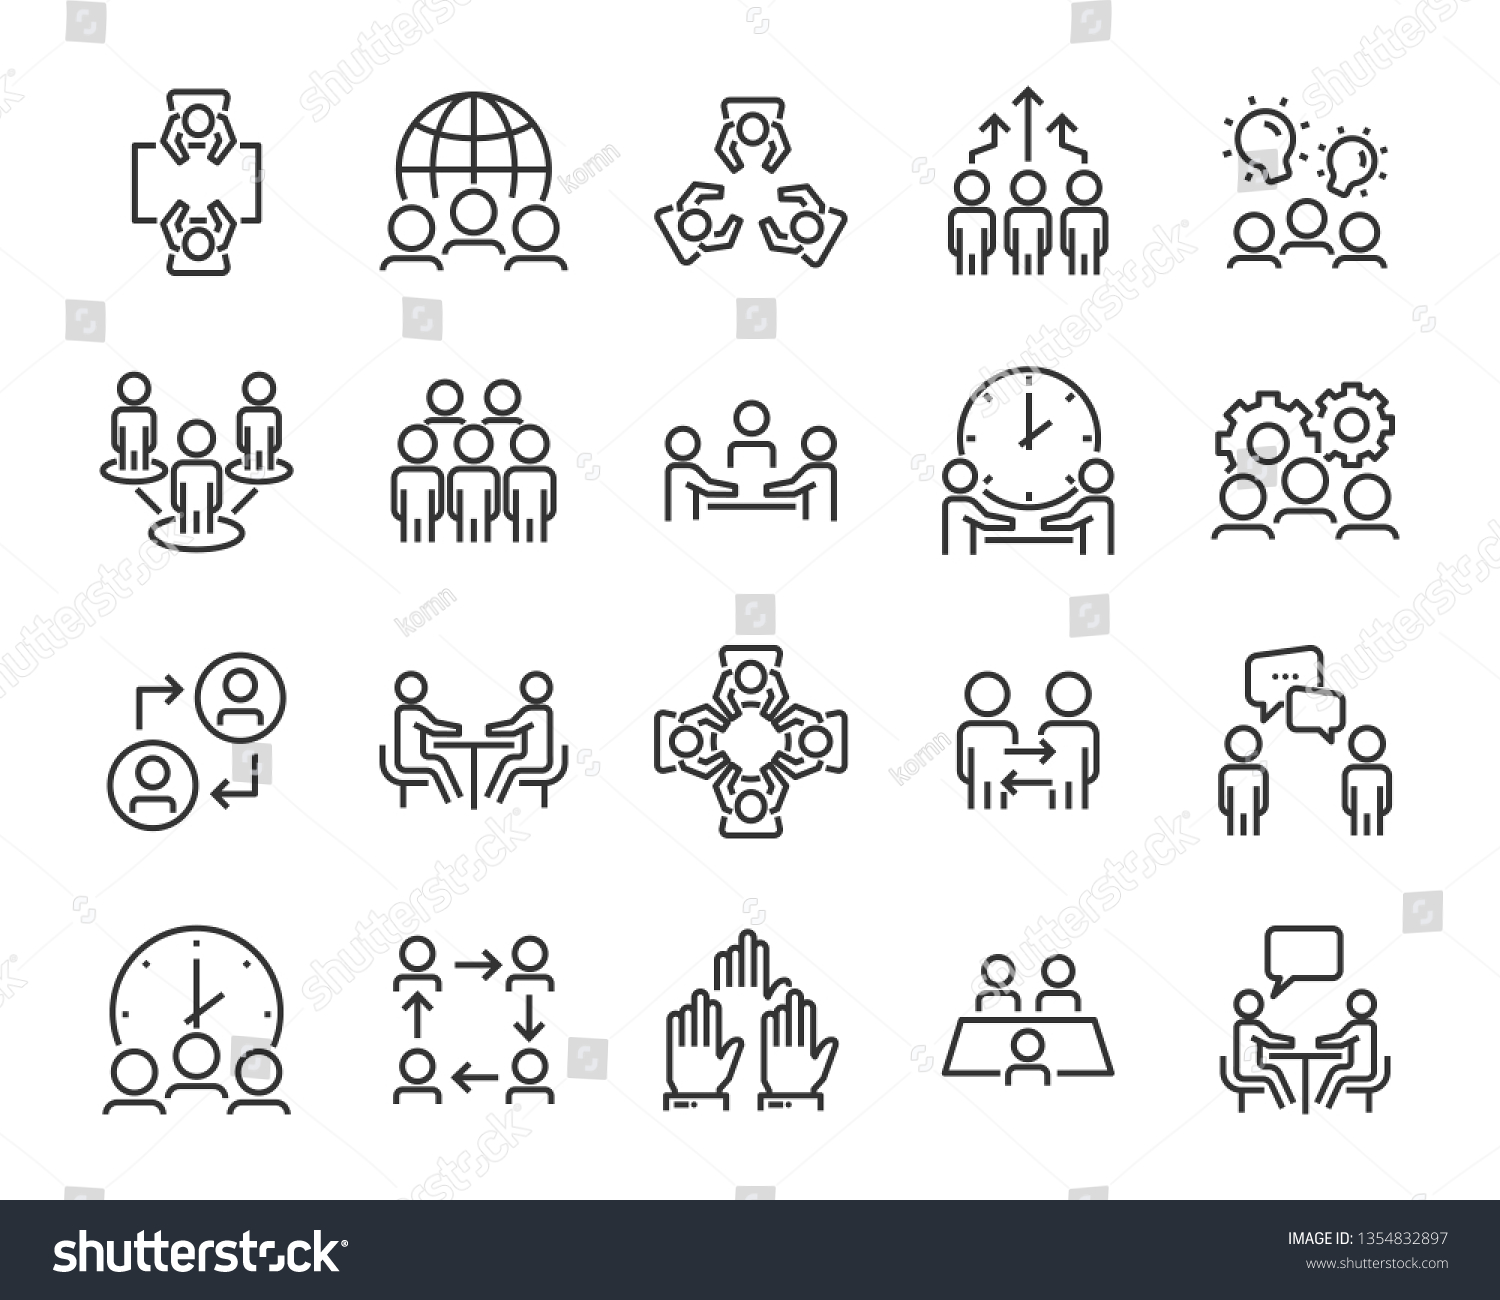 set of business people icons, such as meeting, team, structure, communication, member, group #1354832897